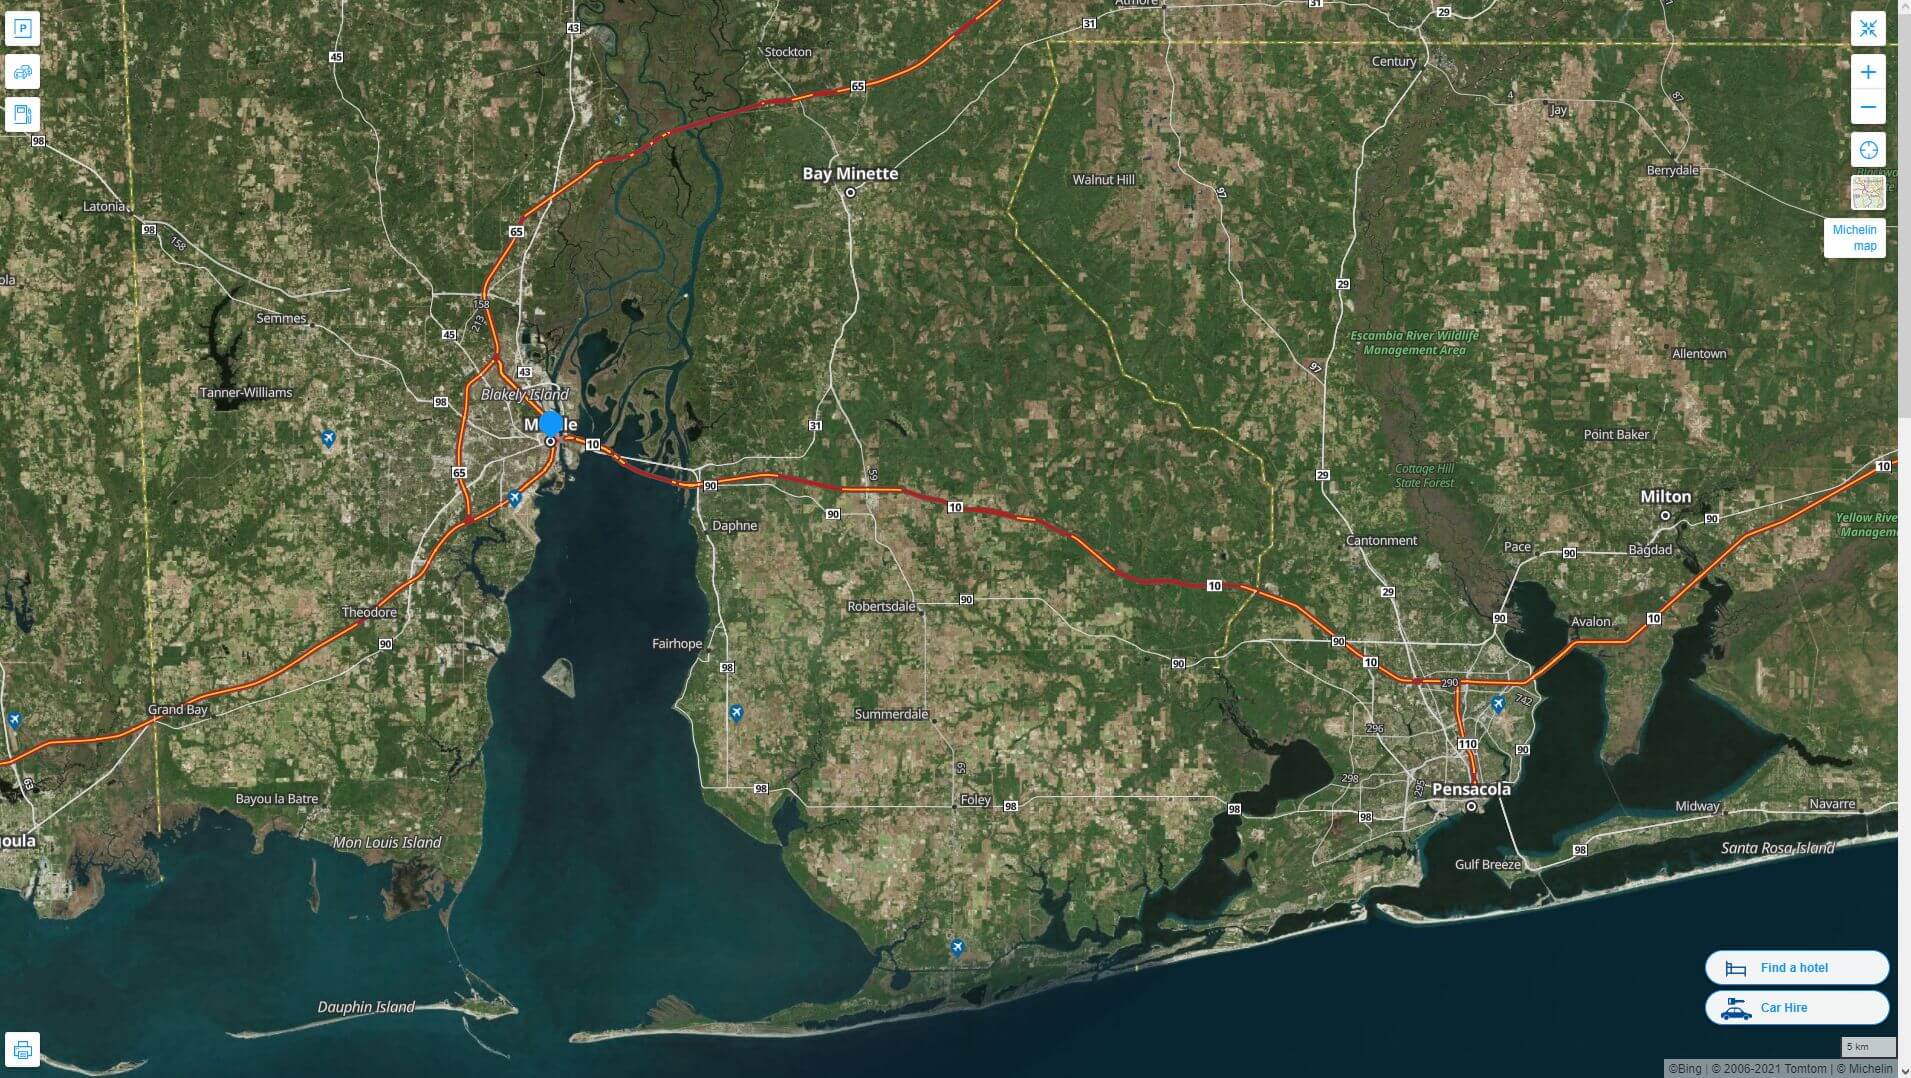 Mobile Alabama Highway and Road Map with Satellite View